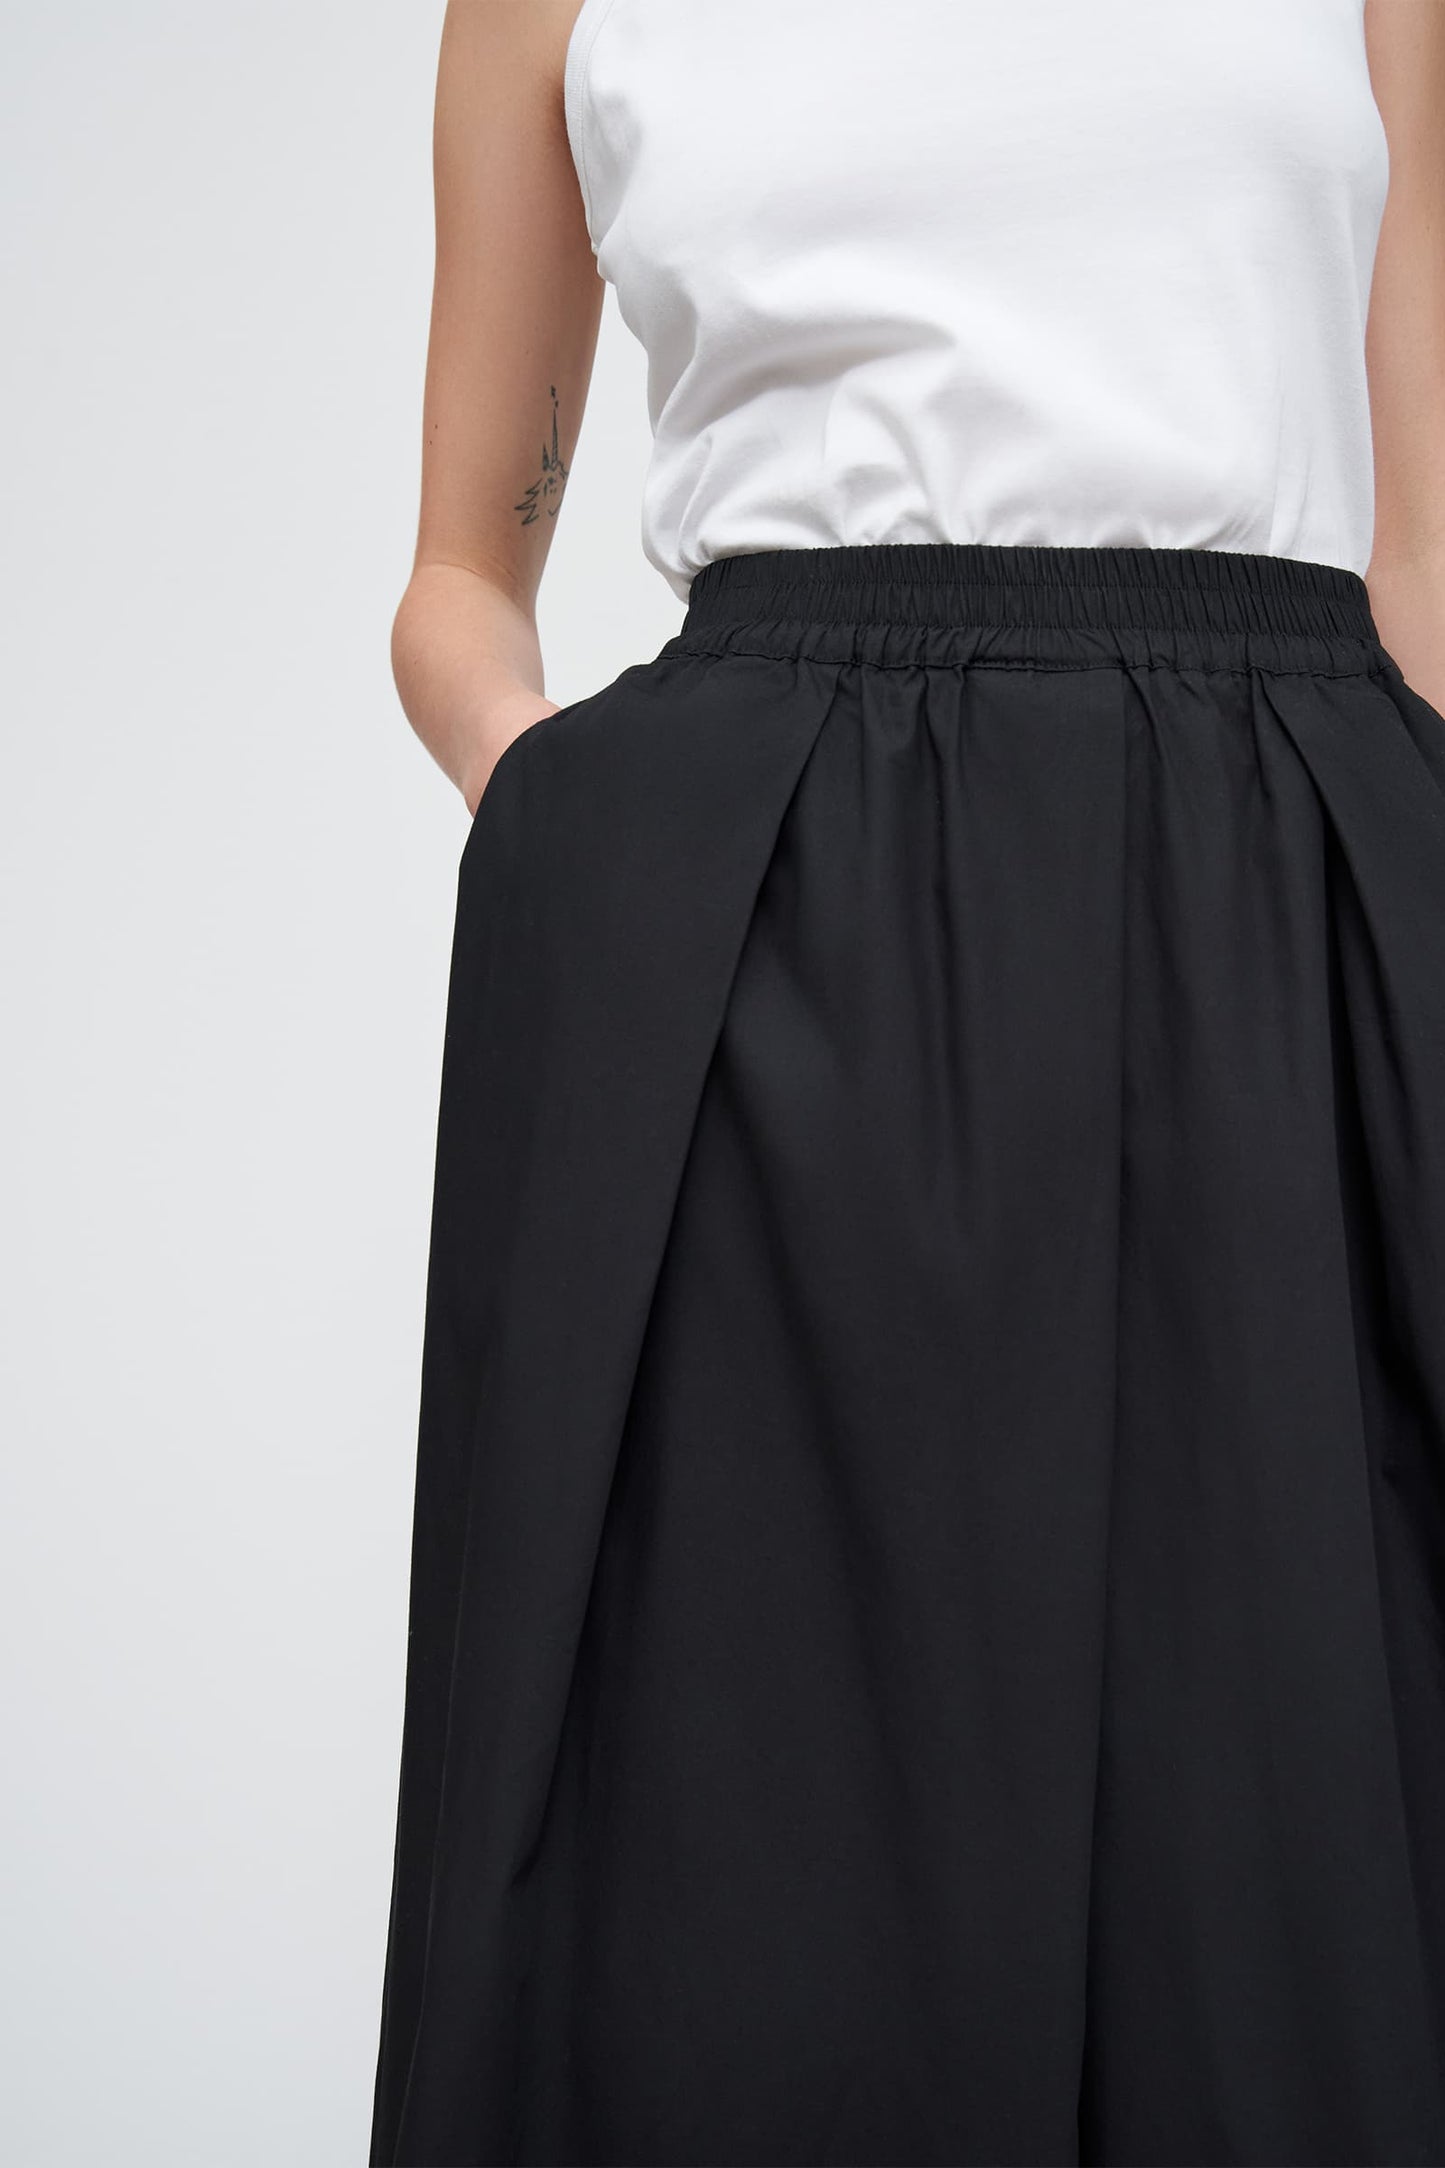 Culottes pants with overlay skirt, P11777